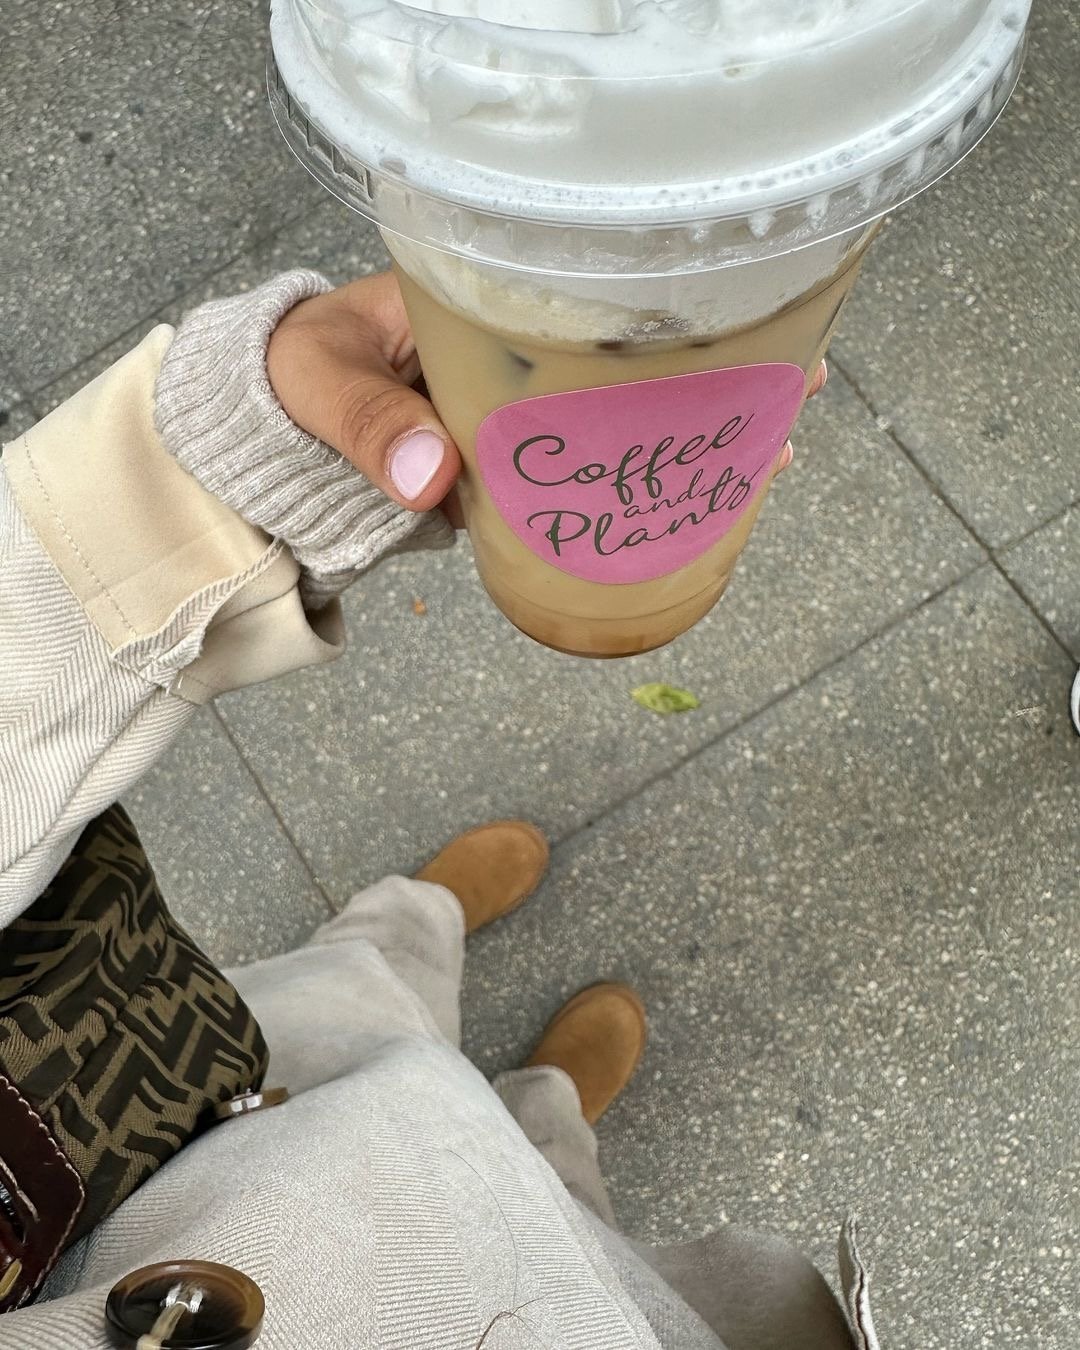 Sip, stroll, repeat: Our iced coffees are made for those who are always on the move. 🧊☕️
📸 @nancy_muro